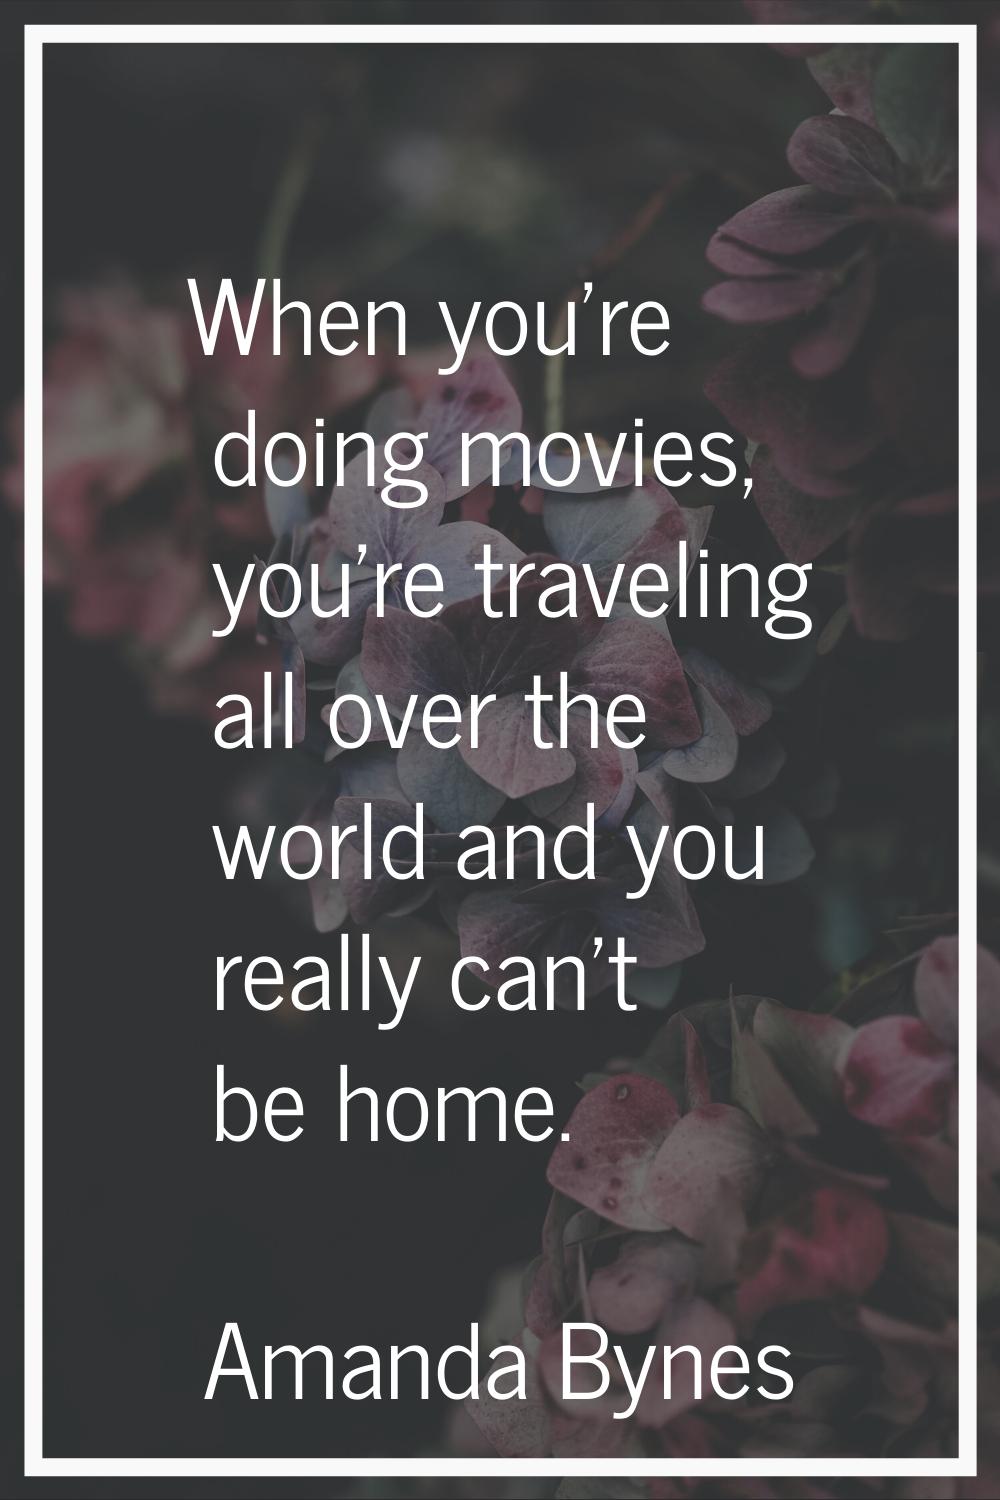 When you're doing movies, you're traveling all over the world and you really can't be home.